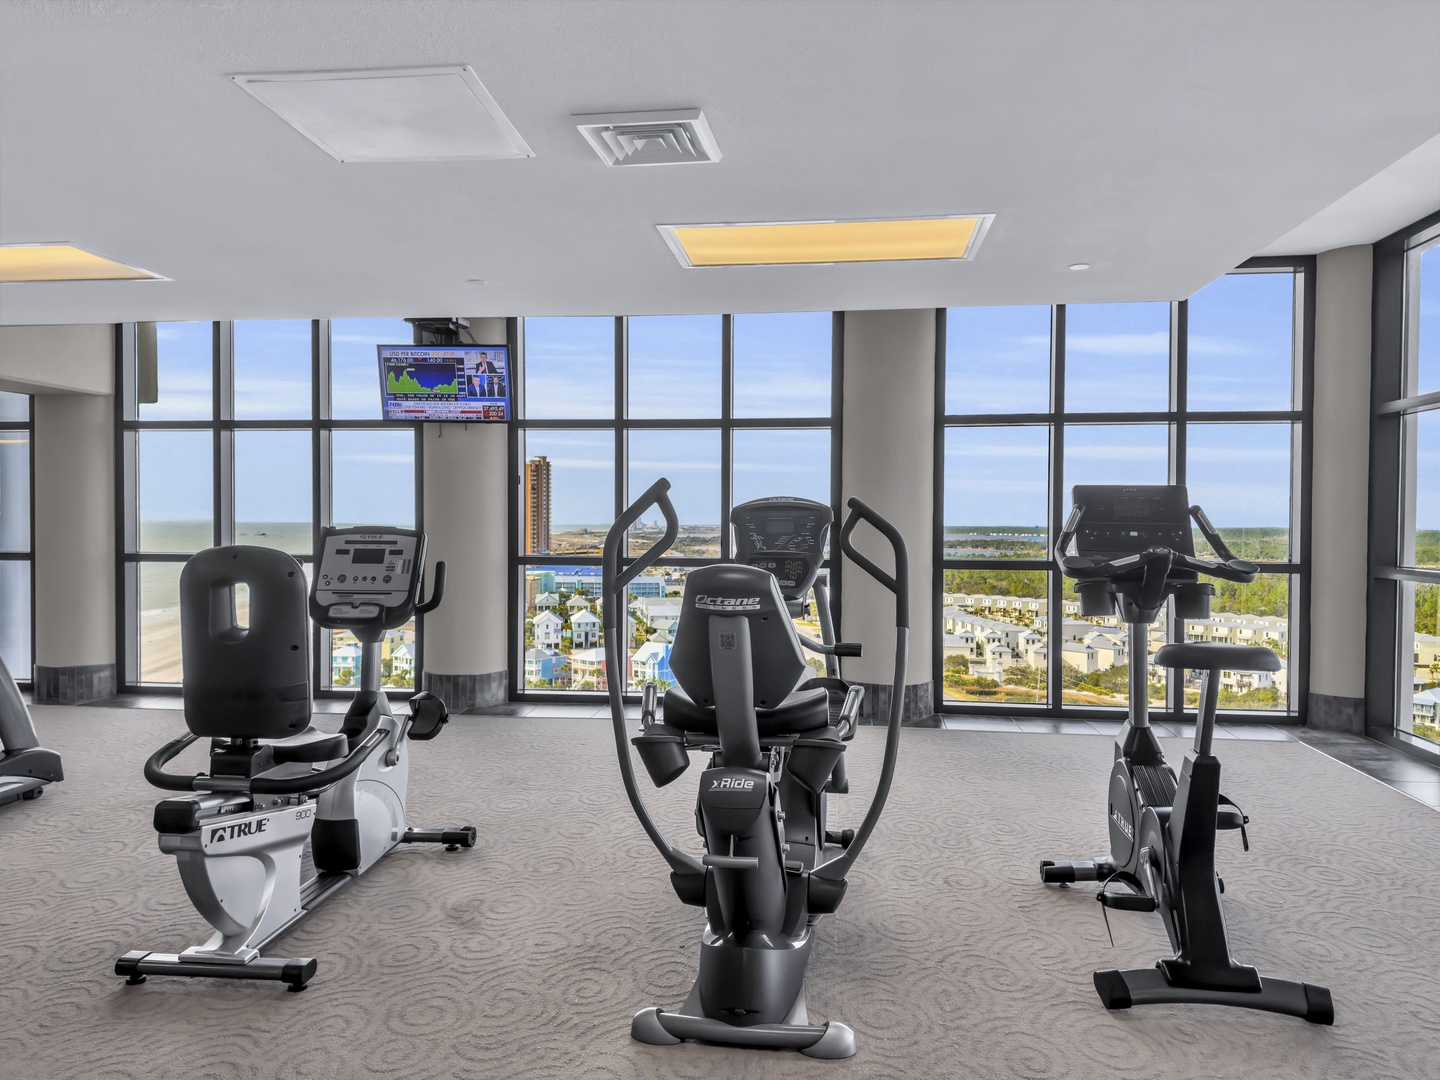 Onsite fitness center located on 15th floor